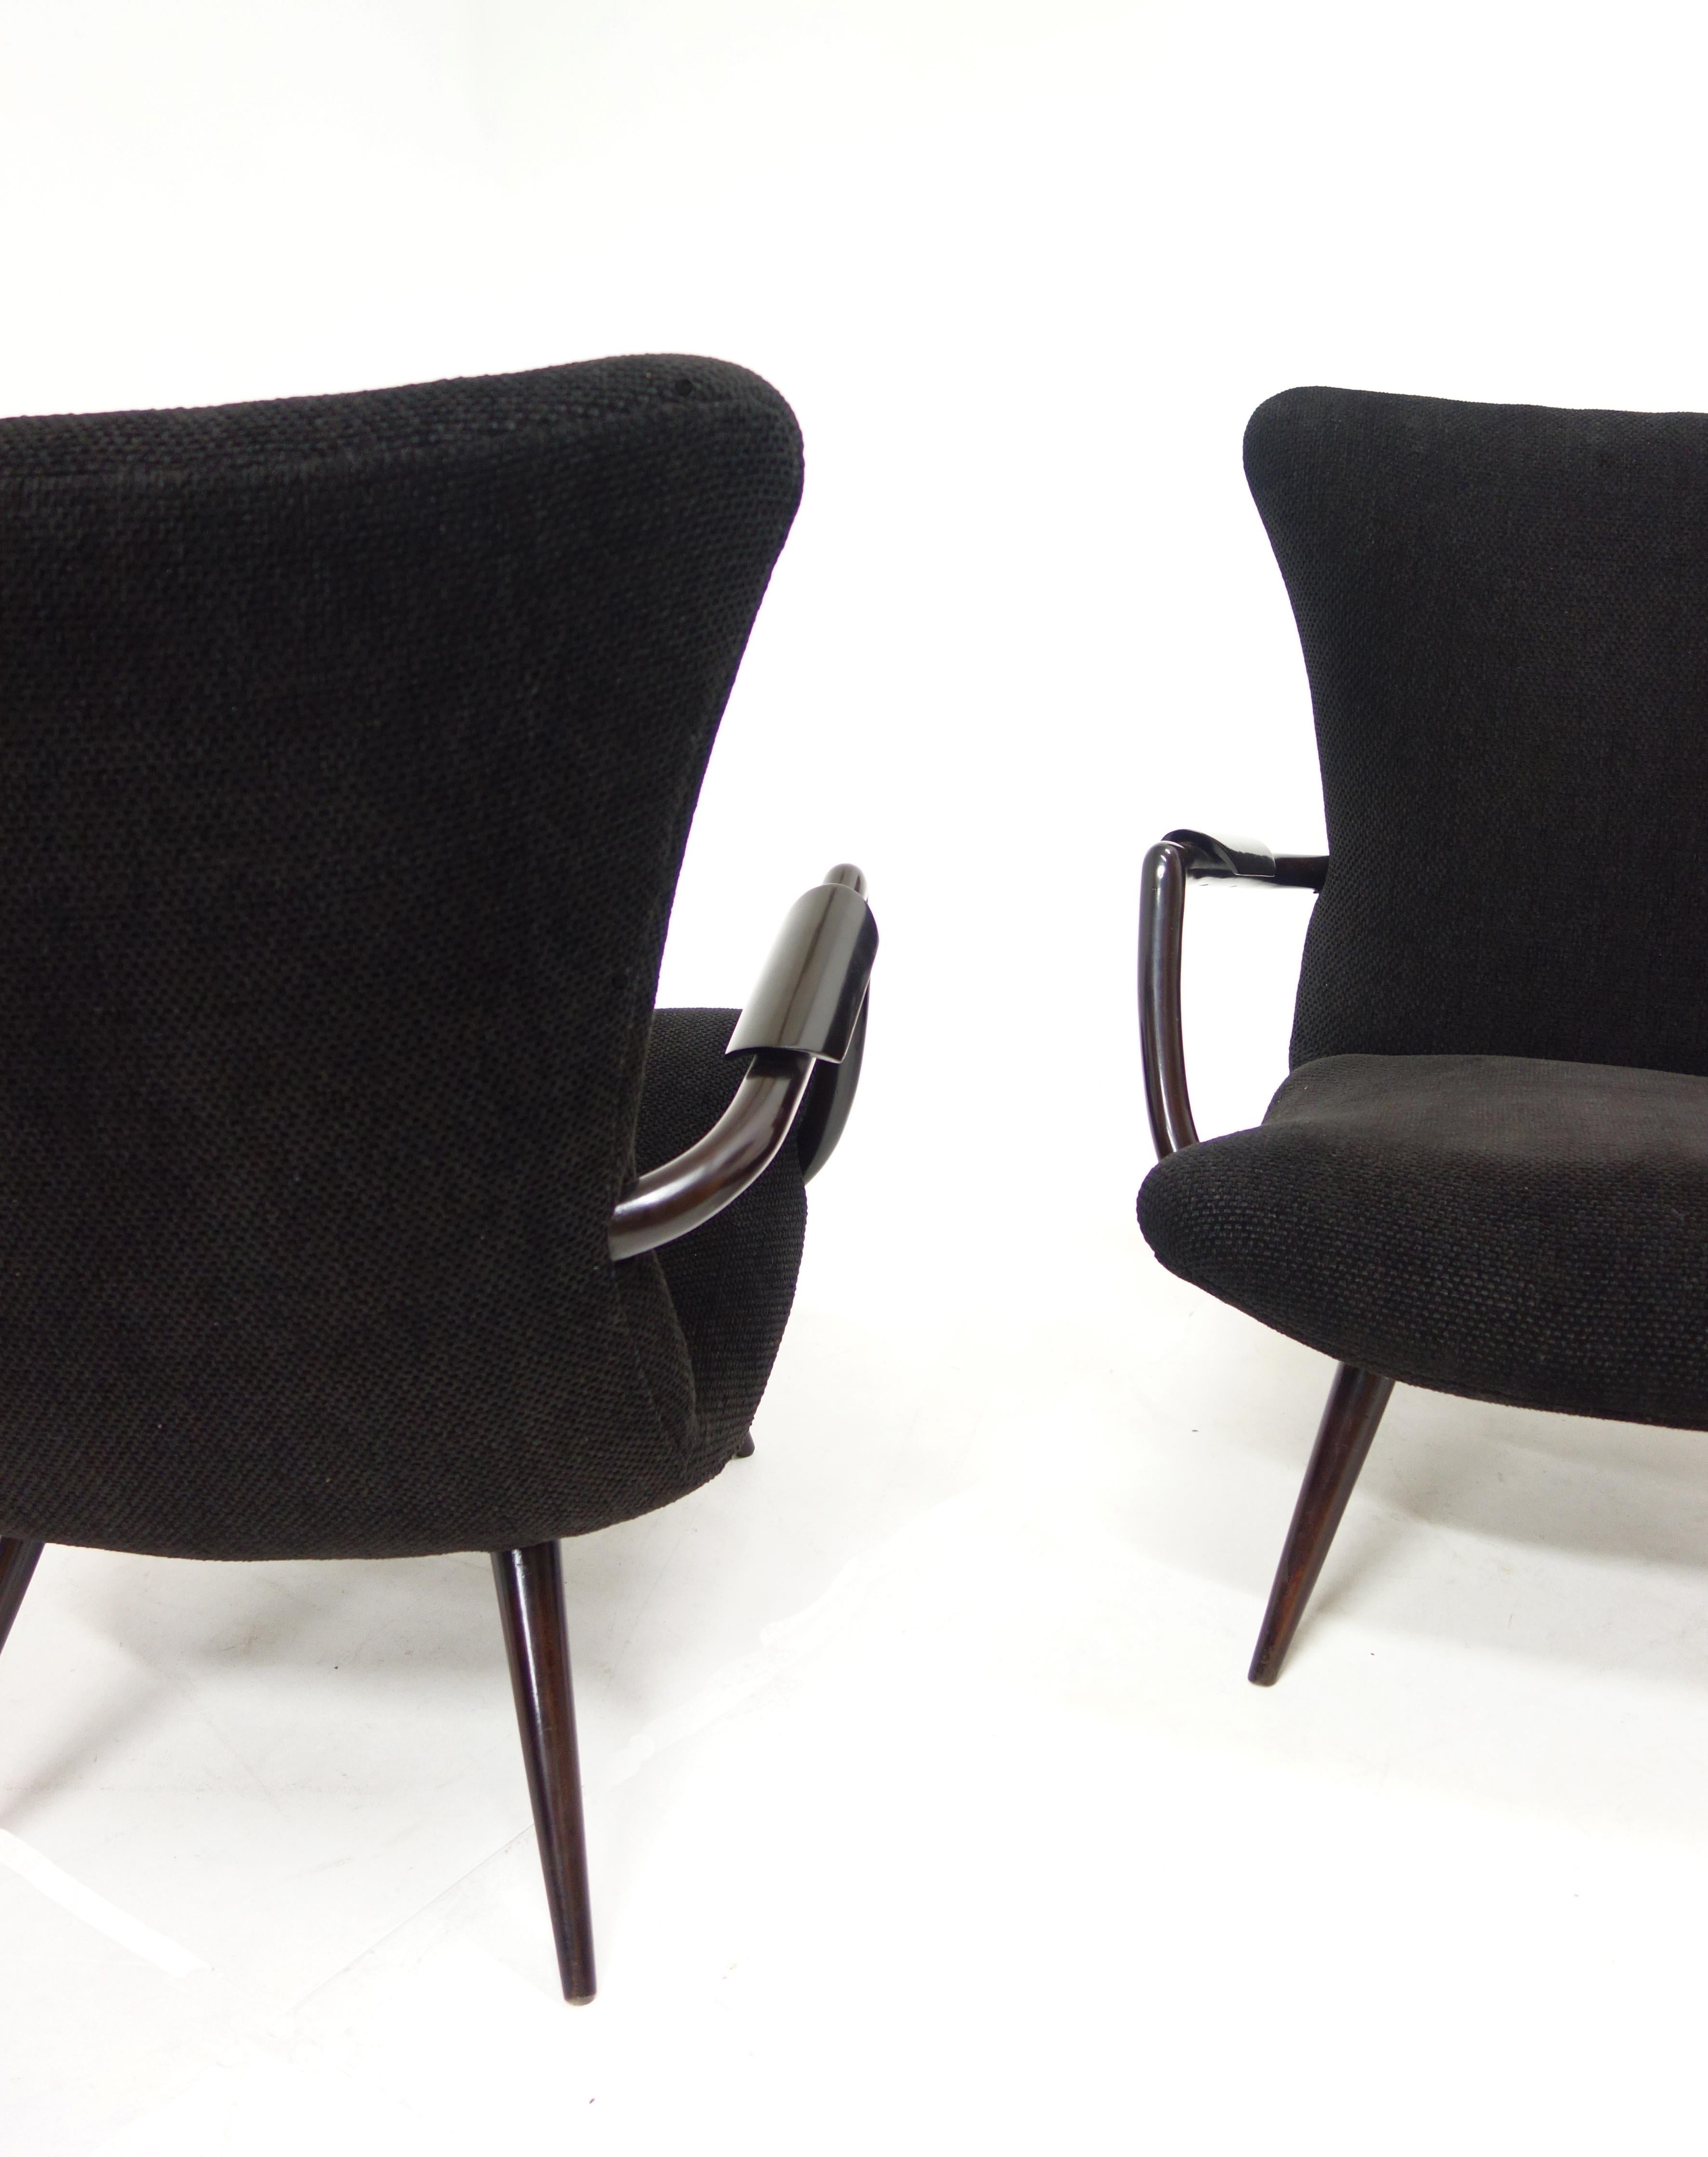 Brazilian Pair of Armchairs by Giuseppe Scapinelli, circa 1950